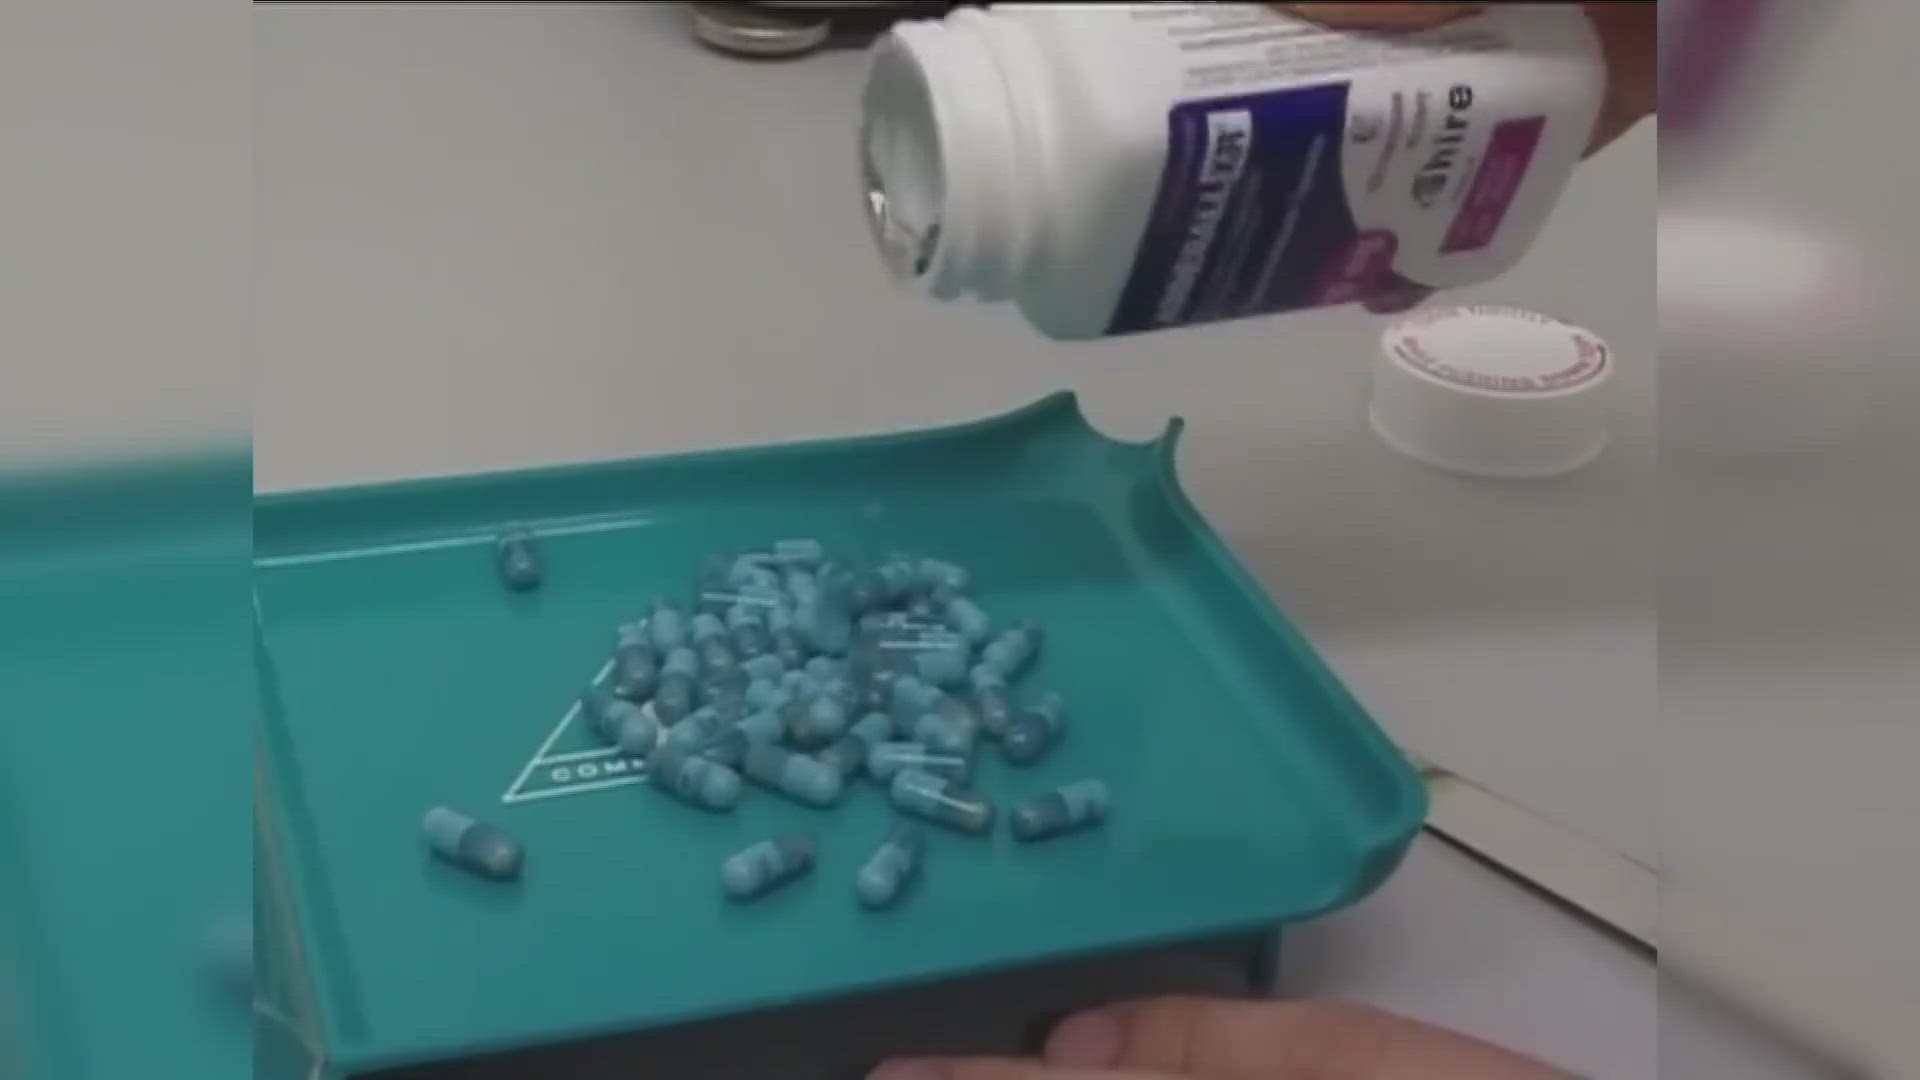 There's a shortage of drugs like Adderall in the U.S. Our health expert explains what to do if you cant find a place with your medicine in supply.